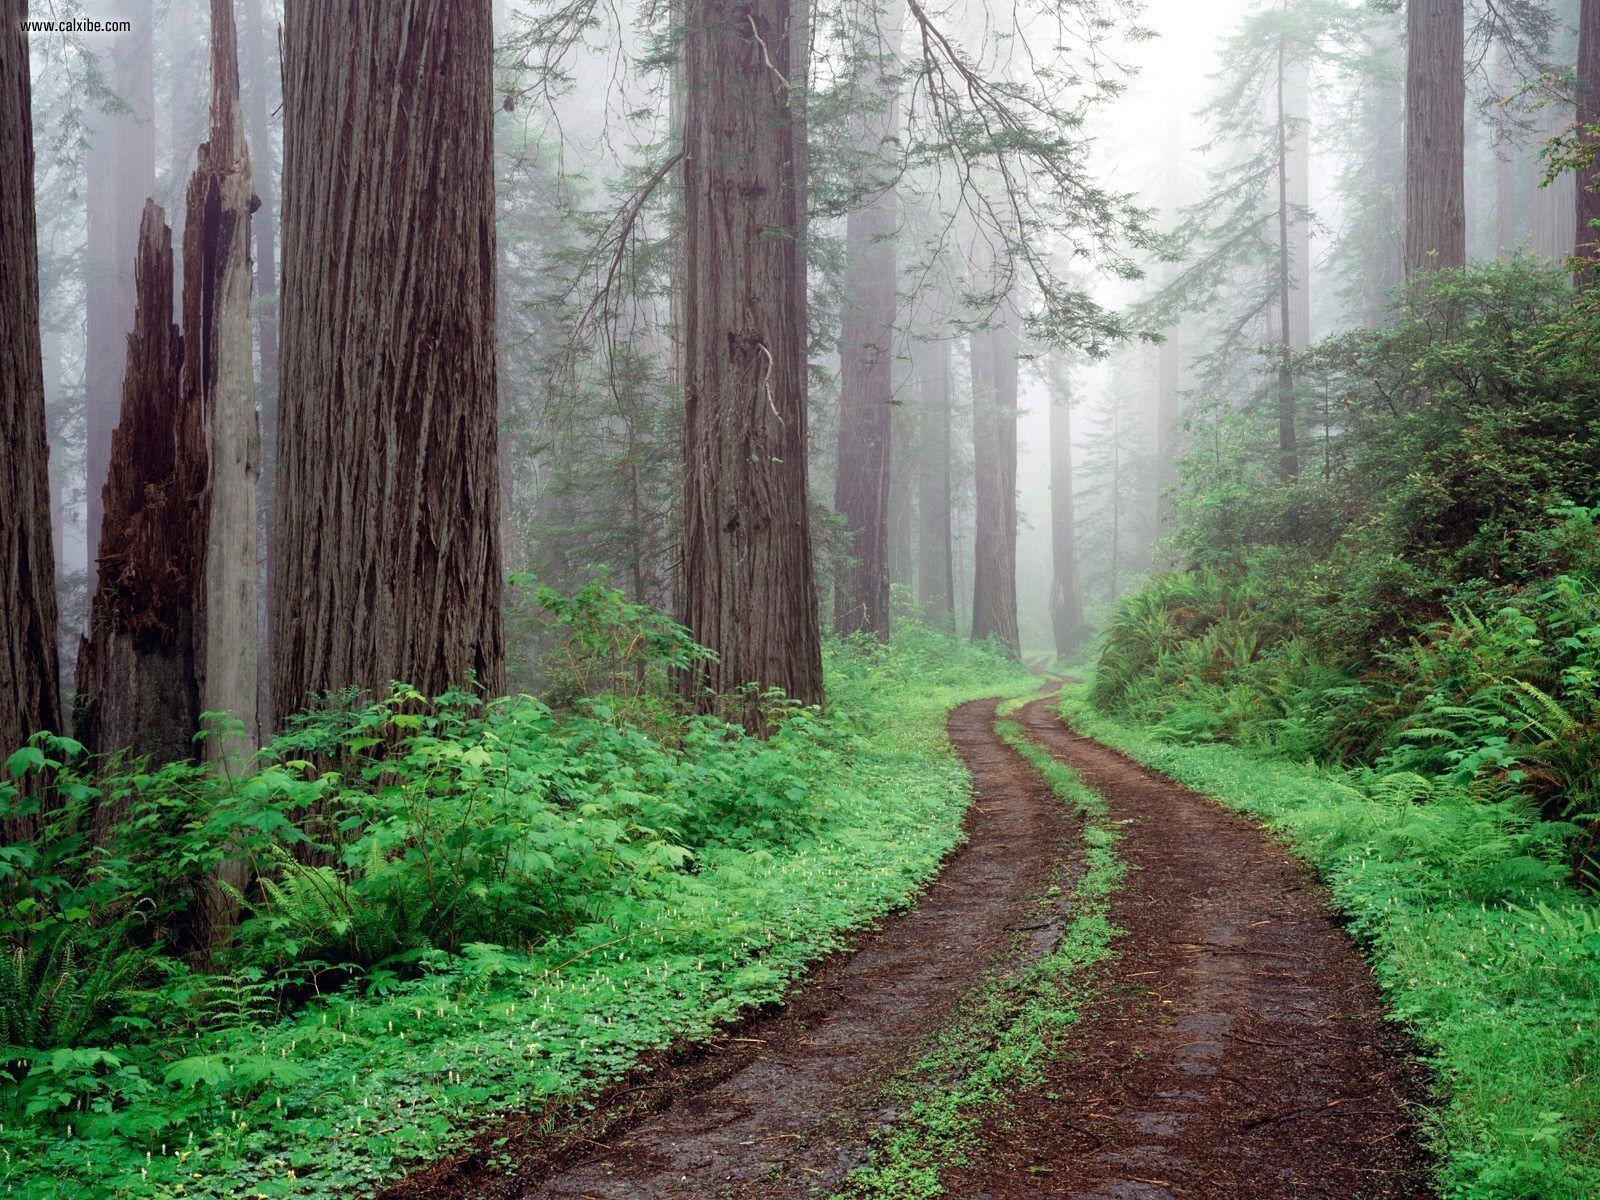 Nature: Redwood National Park California, picture nr. 23251